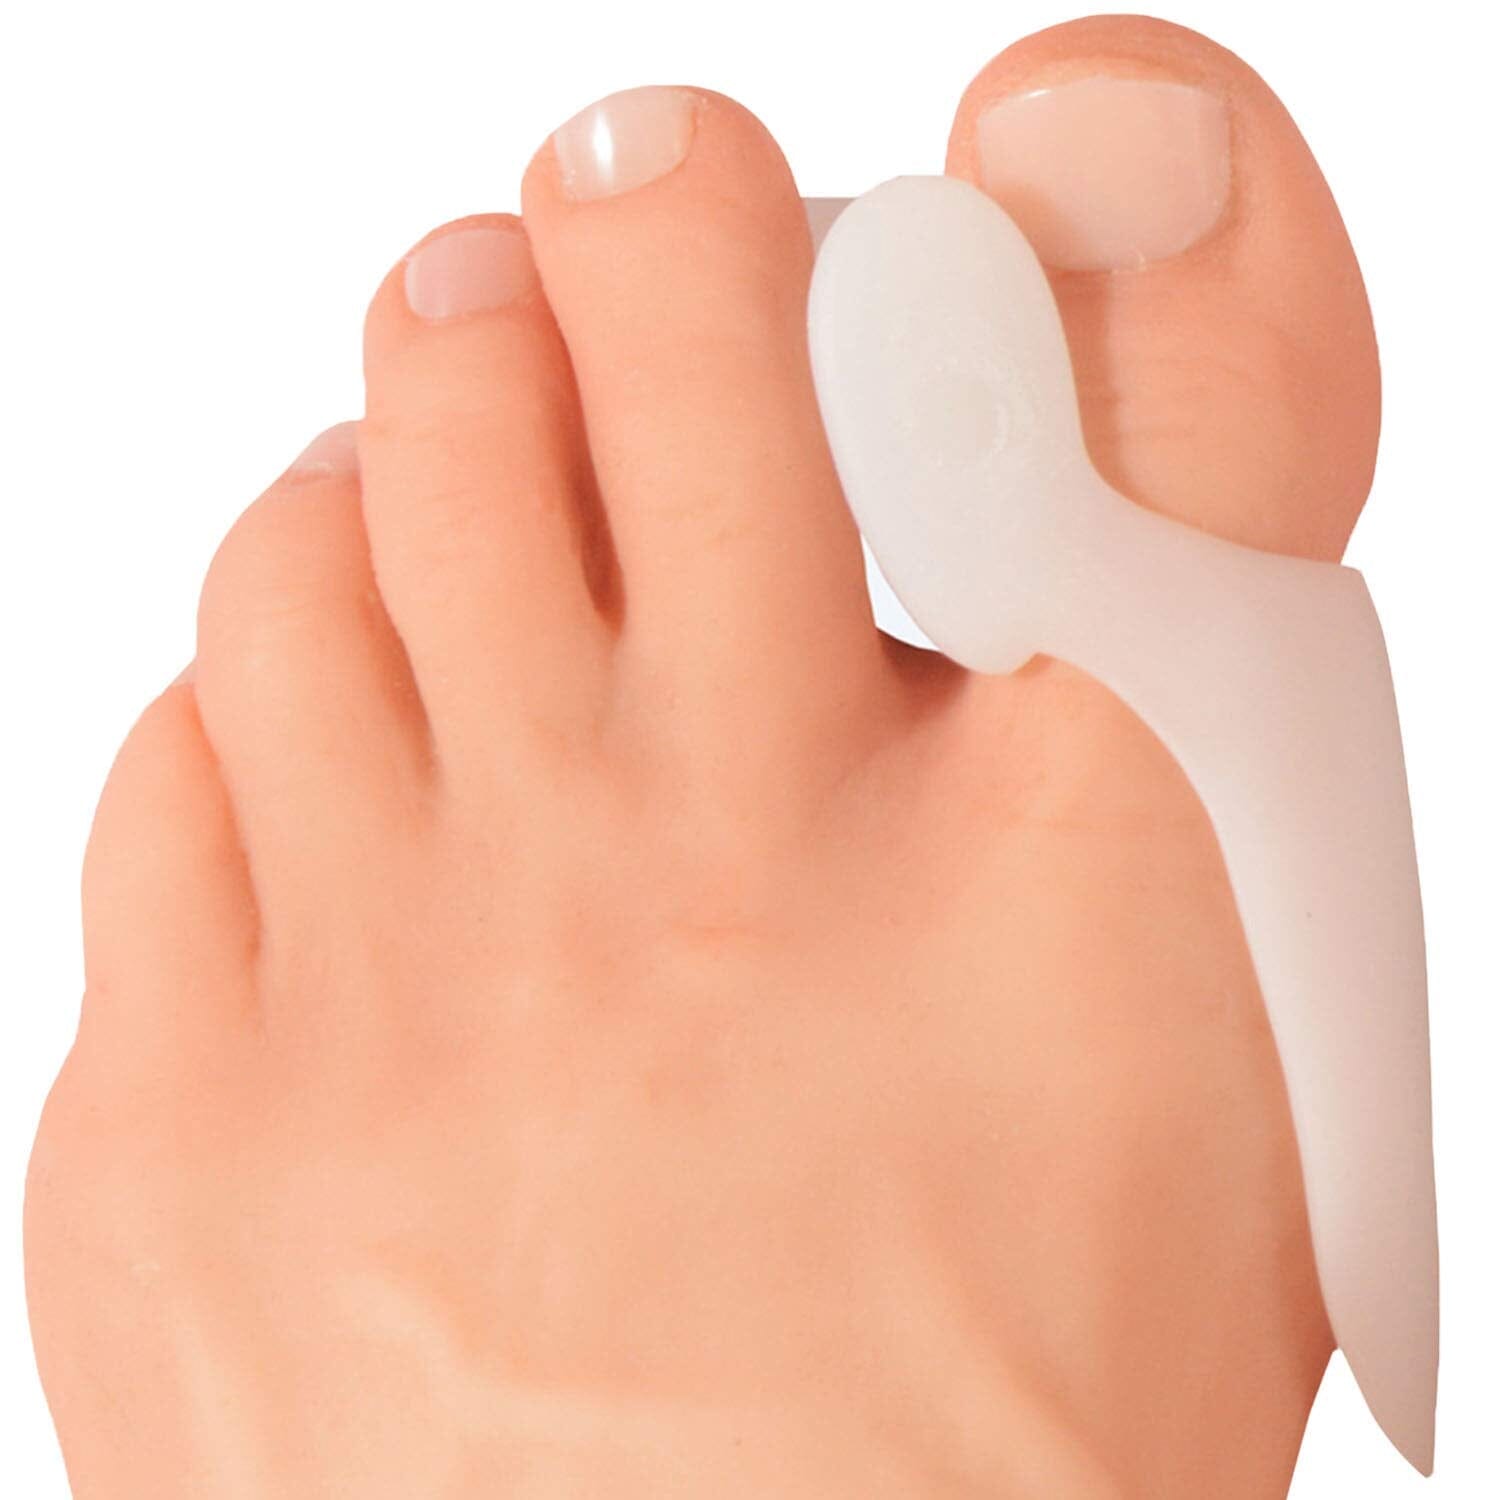 Dr. Frederick's Original Bunion Pad & Spacer - 4pcs - Temporary Bunion Corrector - Toe Separator - Soft Gel Cushion - Bunion Shield - Wear with Shoes - Fast Bunion Pain Relief for Women & Men Foot Pain Dr. Frederick's Original 